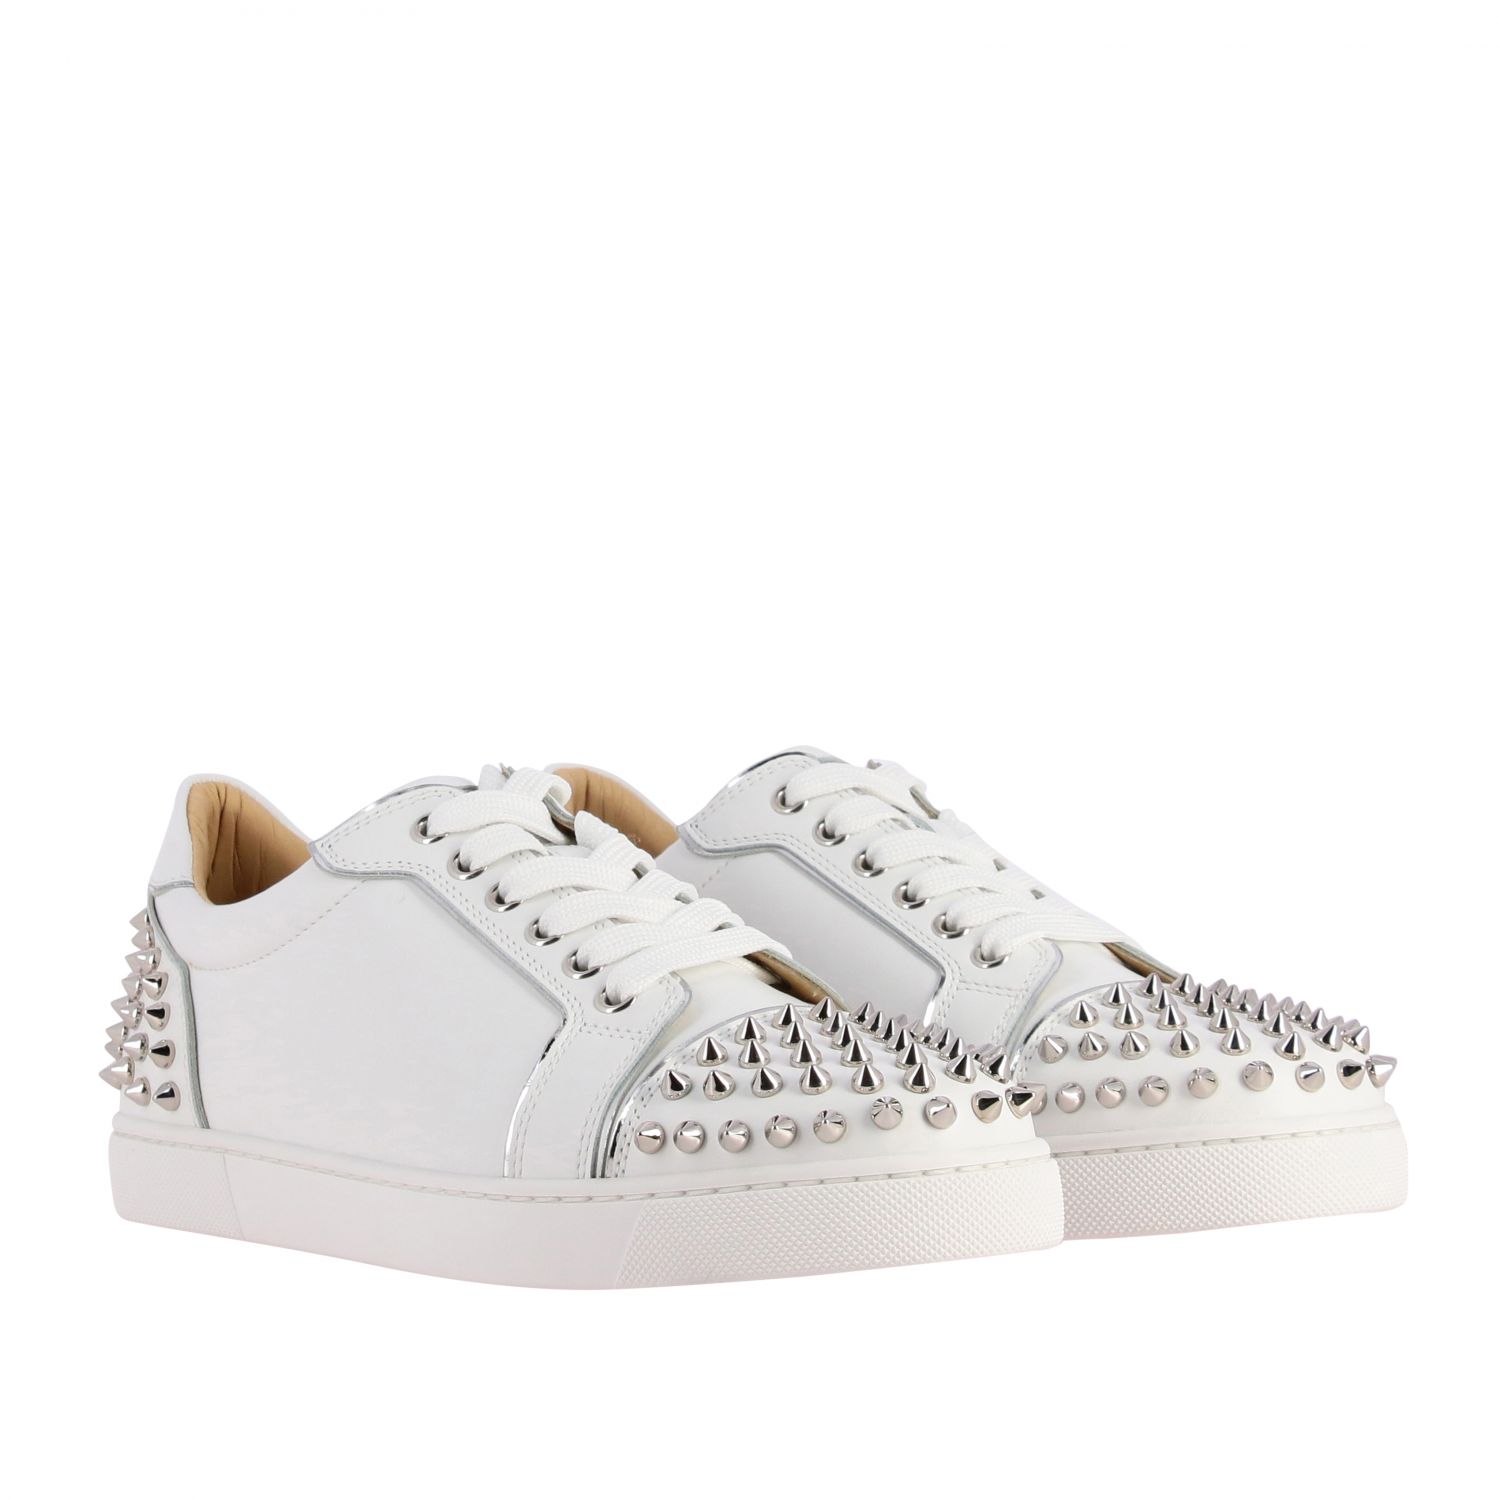 Christian Louboutin Vieira spikes sneakers in studded leather